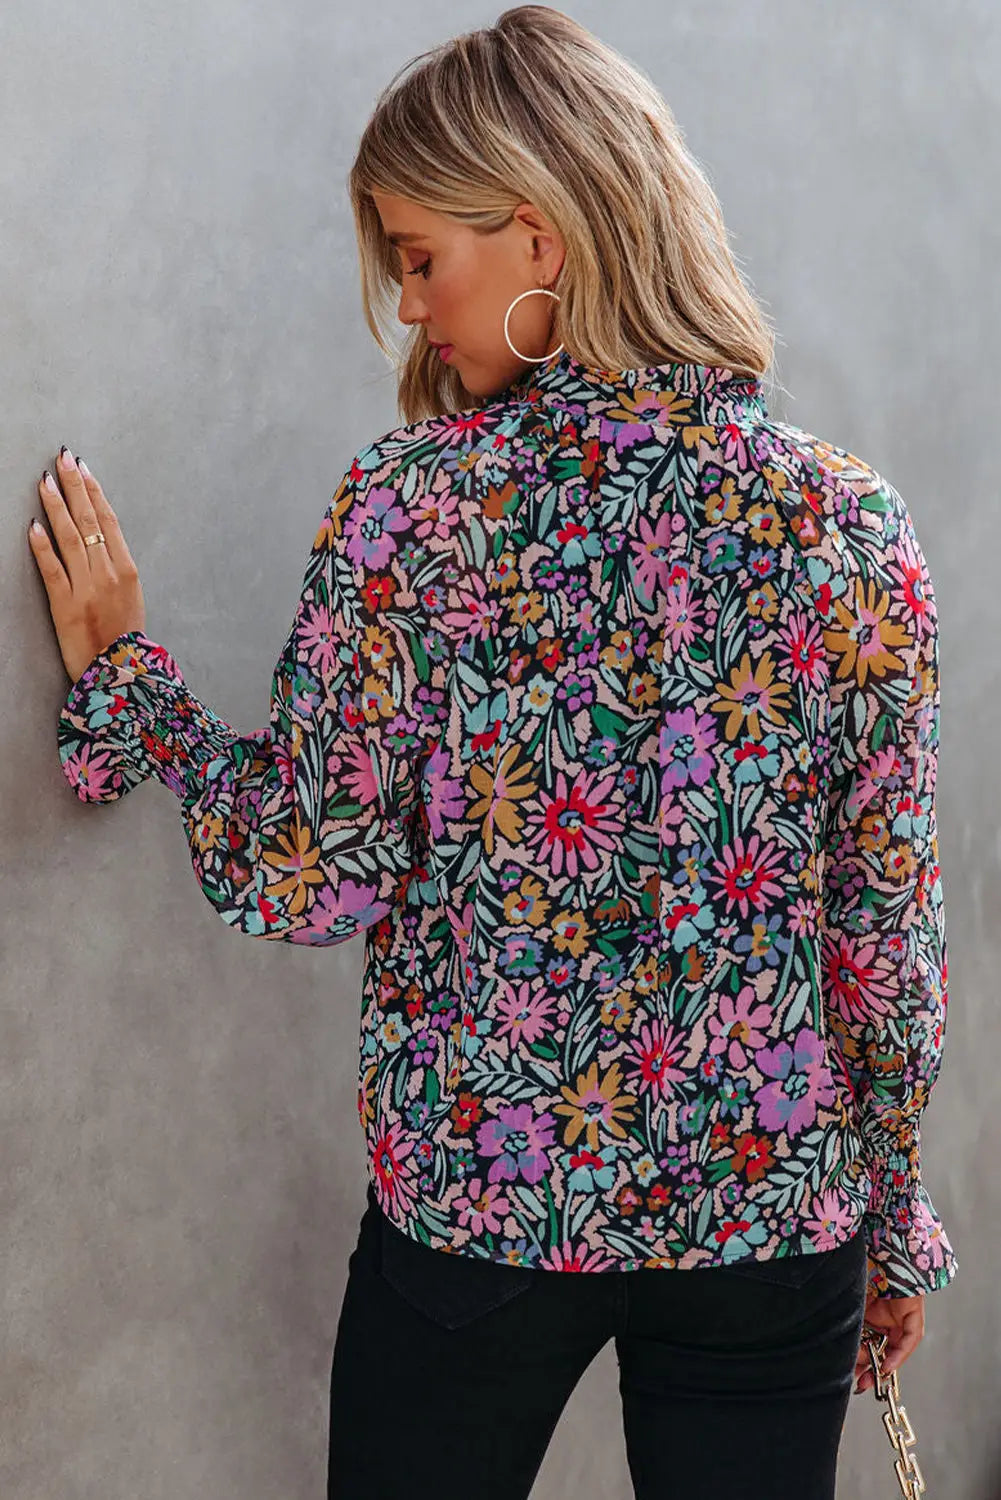 Multicolor floral print ruffled long sleeve v-neck blouse - tops